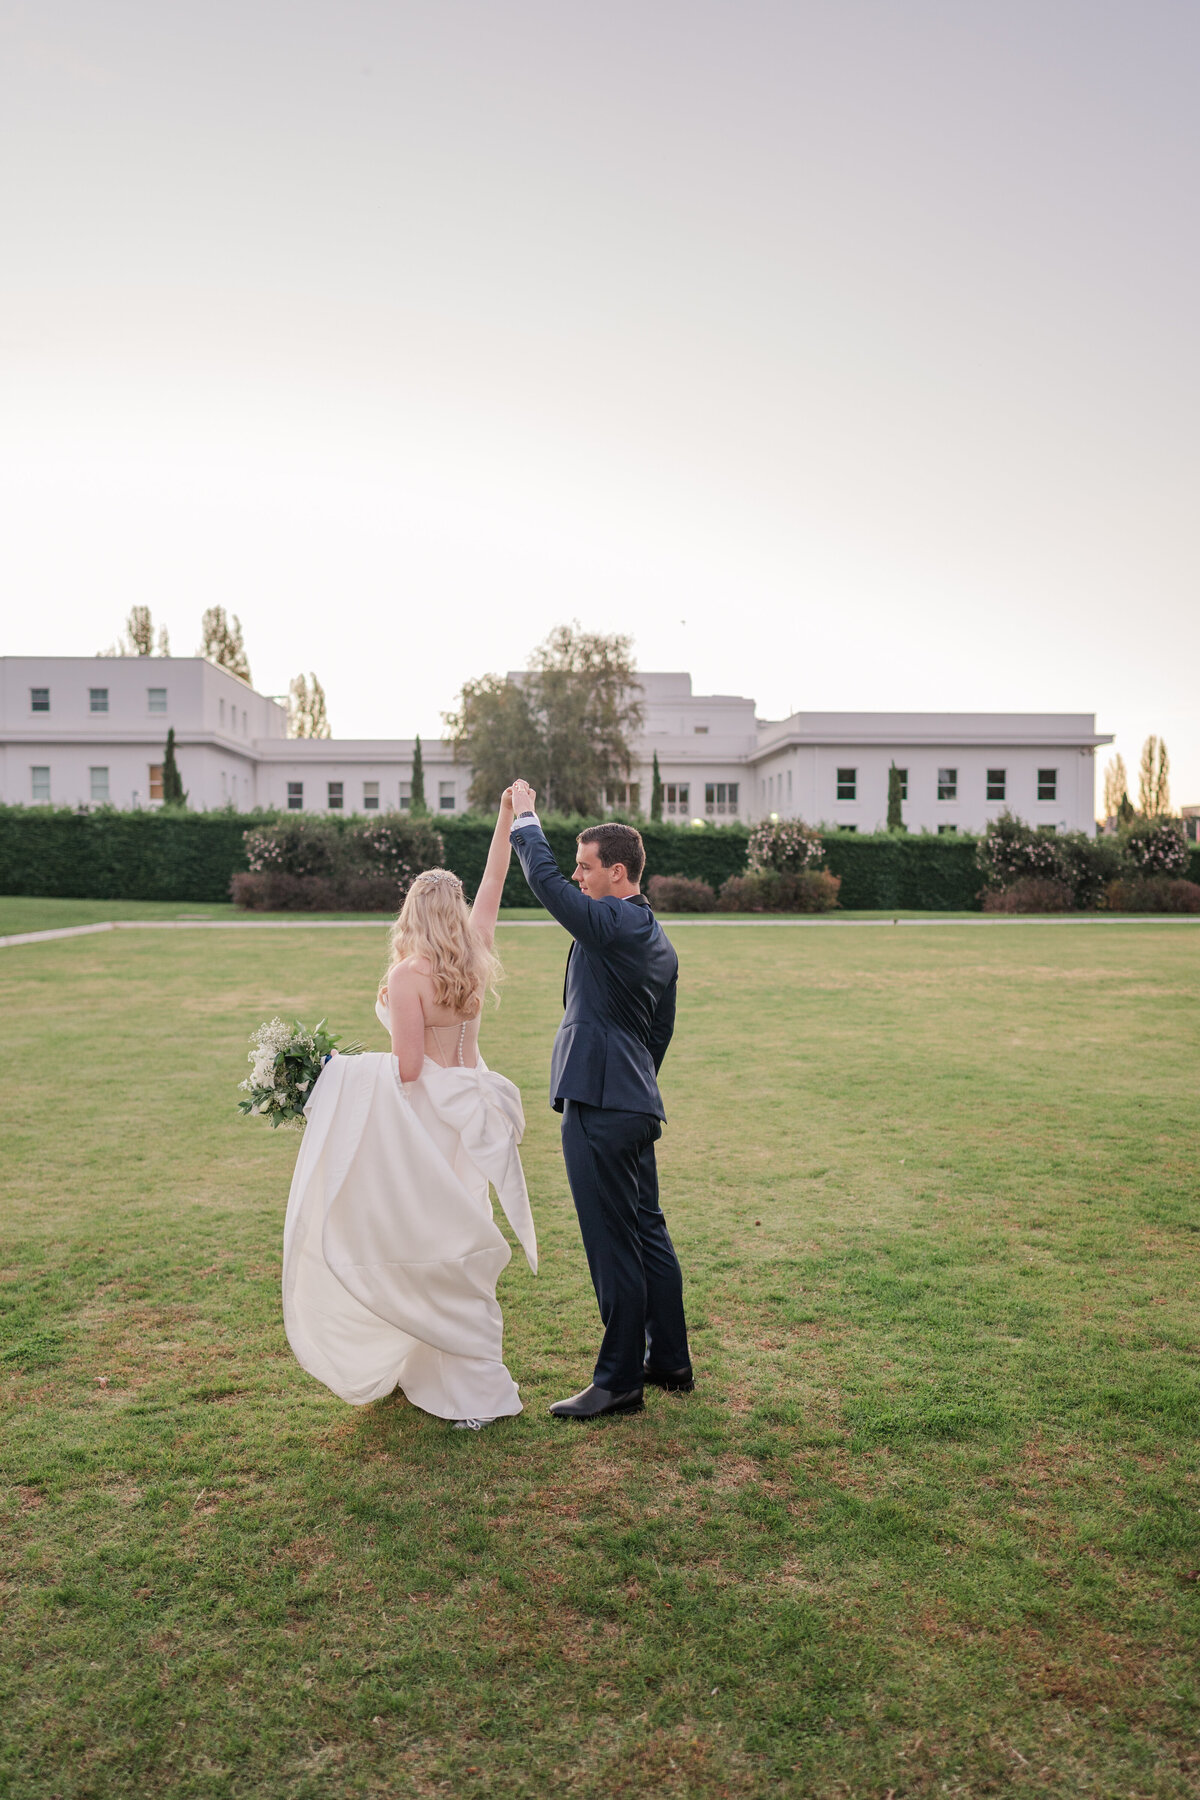 Iconic wedding at Old Parliament House